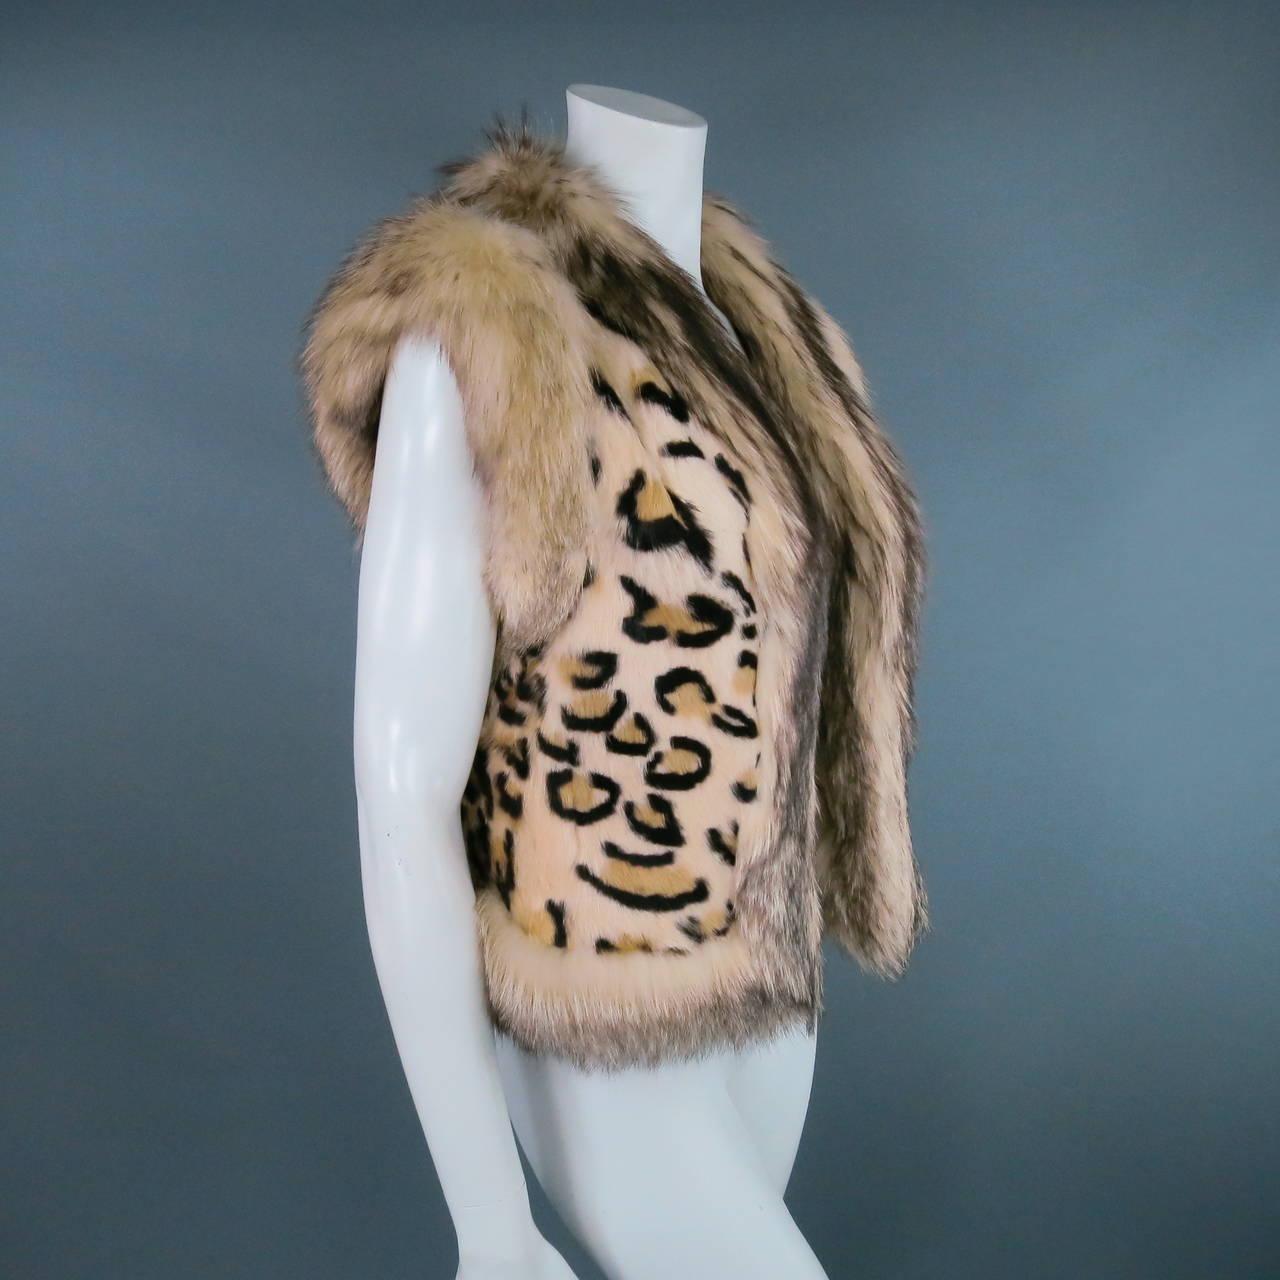 Stunning rabbit fur vest in beige leopard print by VALENTINO. A dramatic statement piece for any occasion. Made in Italy.
 
Excellent Pre-Owned Condition.
 
Measurements:

Bust: 36 in.
Shoulder: 17 in.
Length: 21 in.